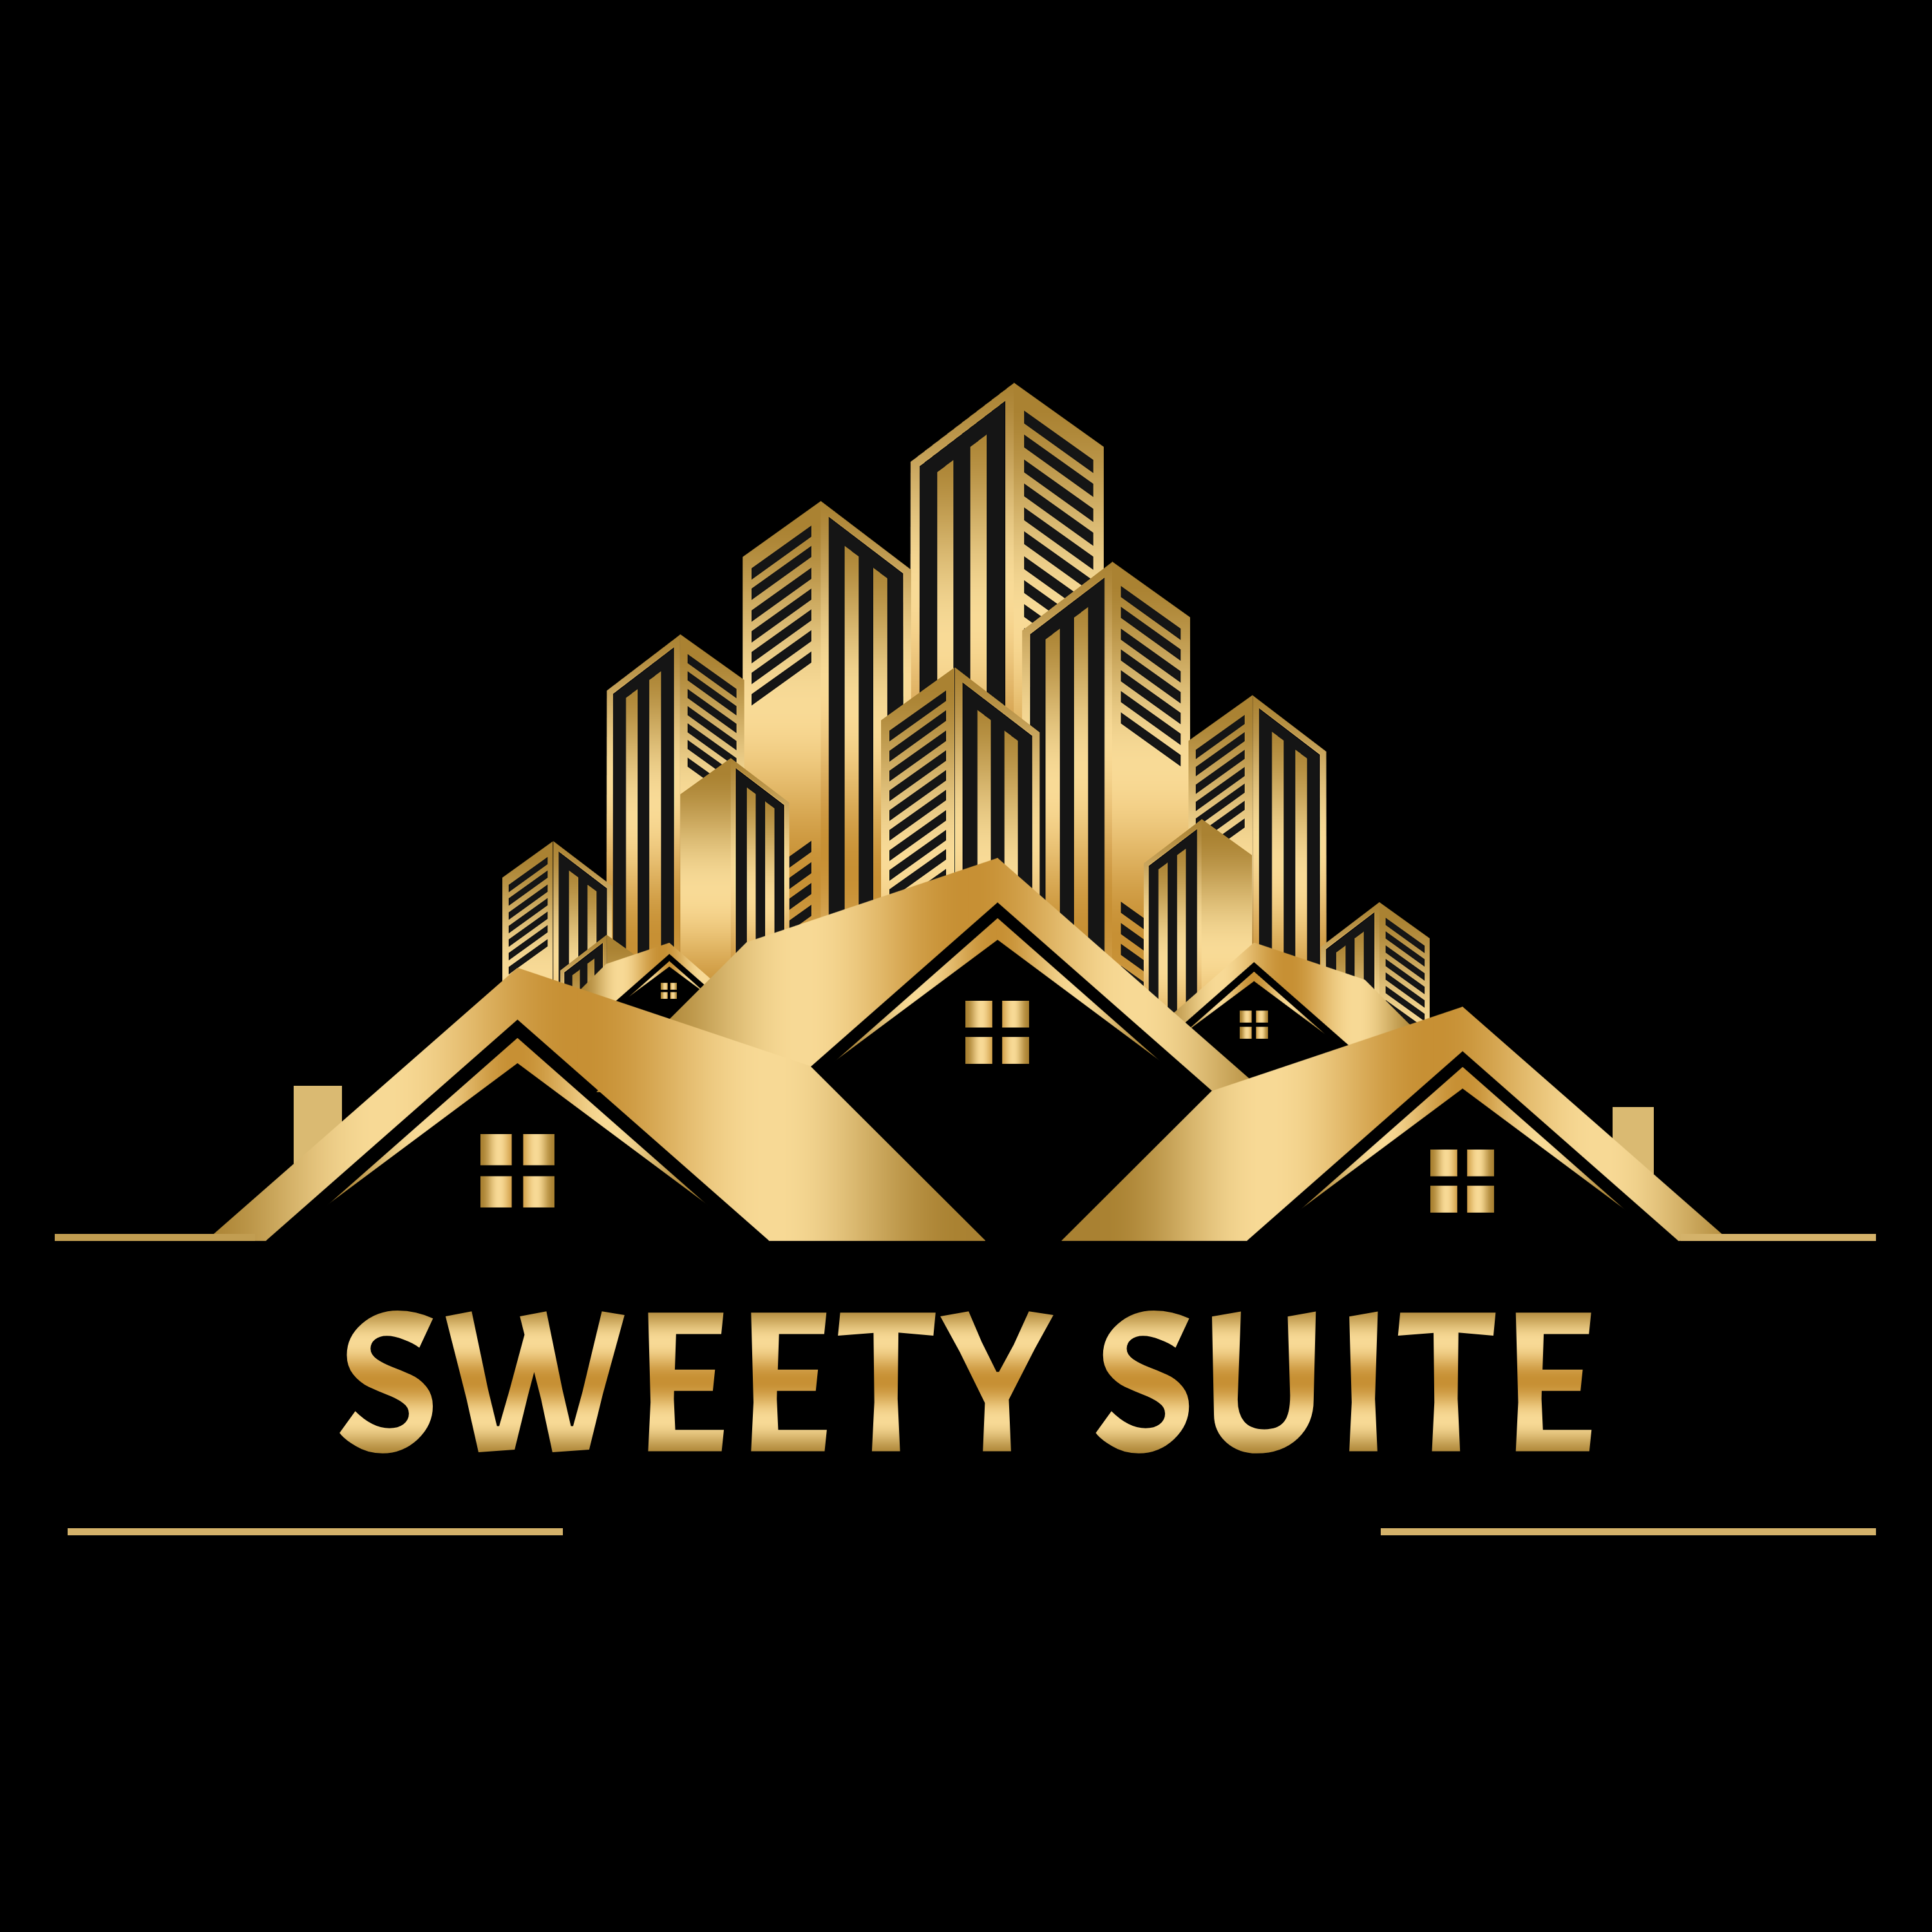 SWEETY SUITE